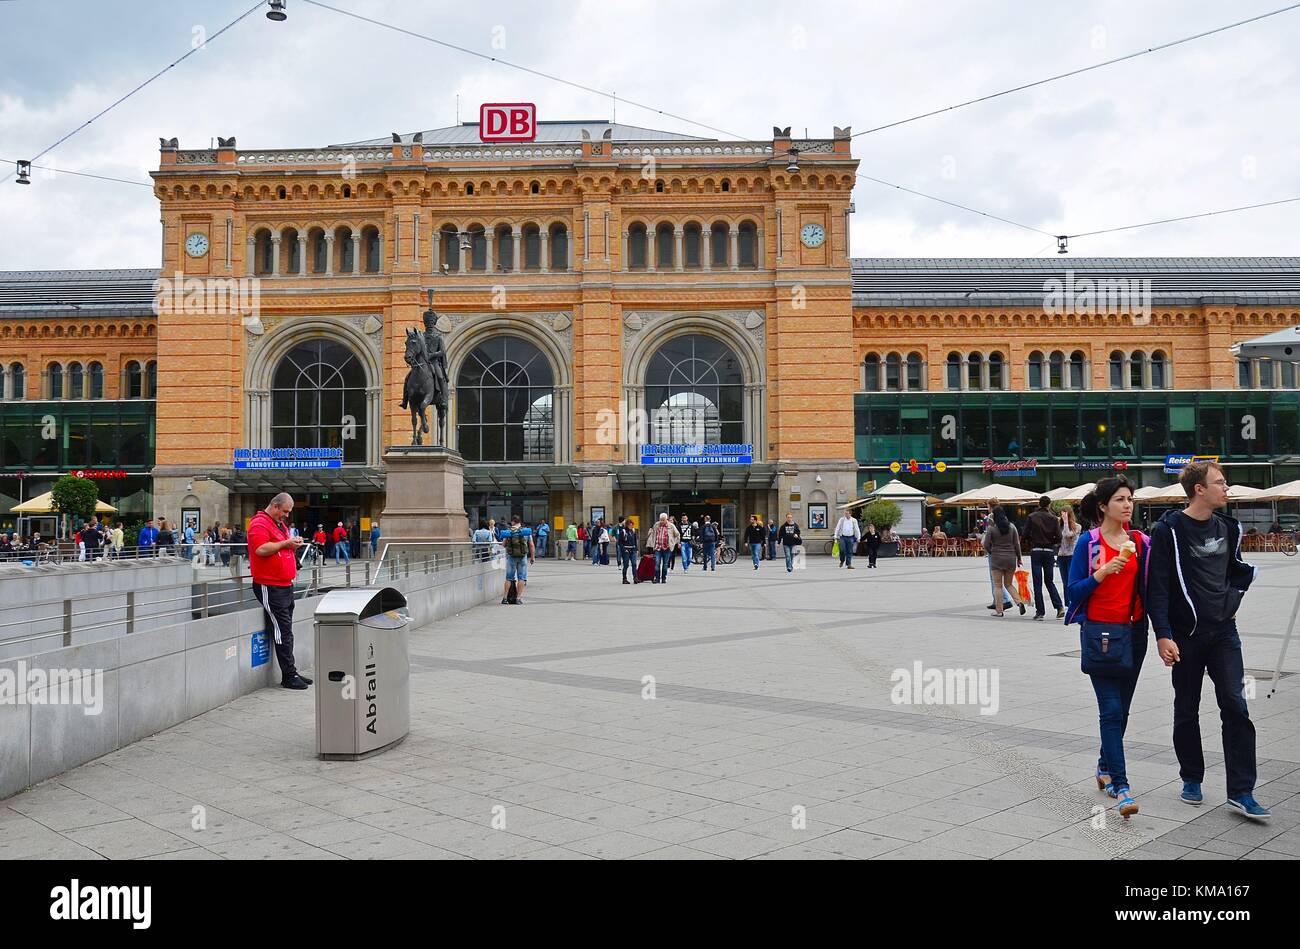 The Railway Station of Hannover (Niedersachsen, Germany) Stock Photo